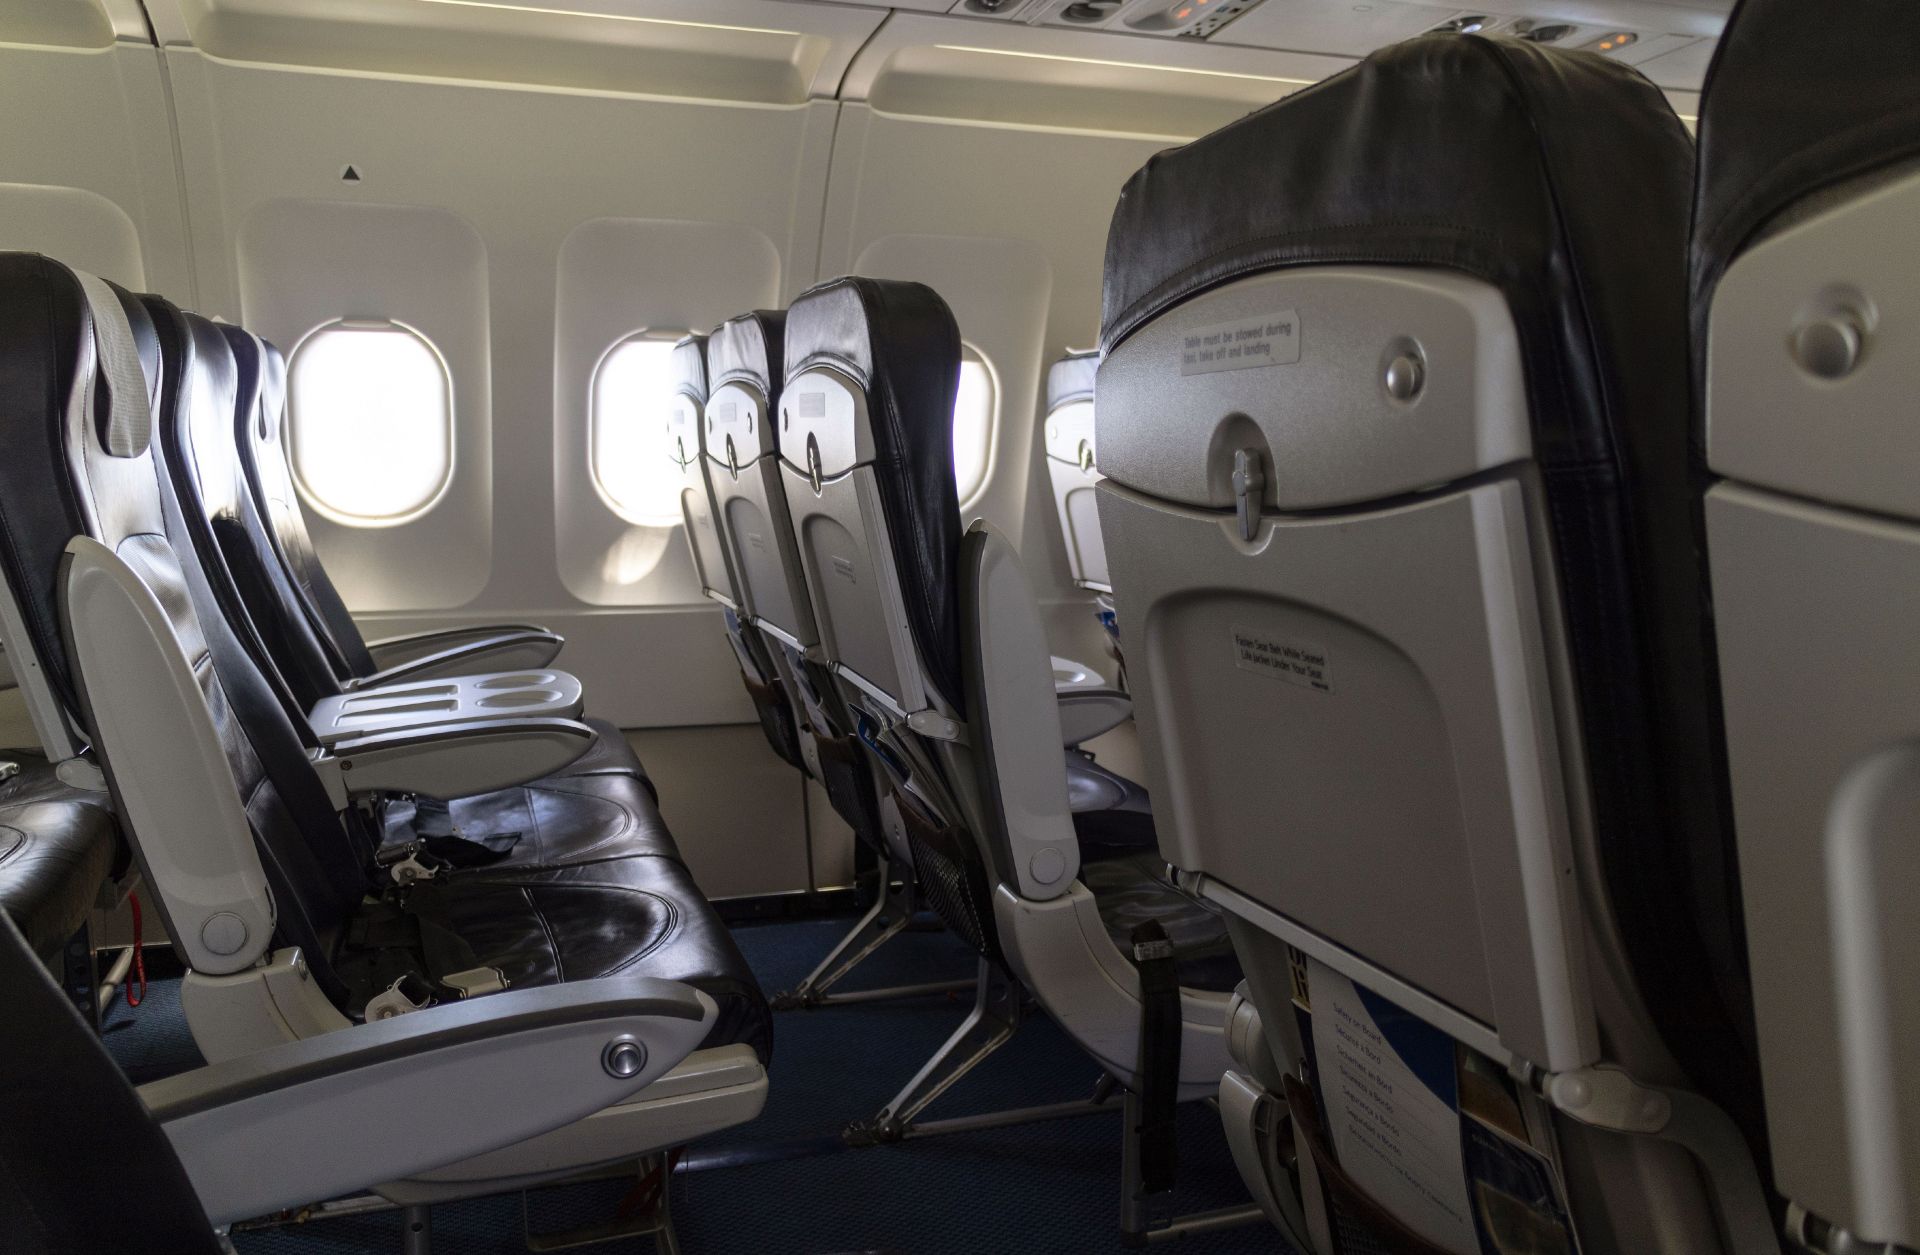 This photo shows a rows of seats on a passenger aircraft. 